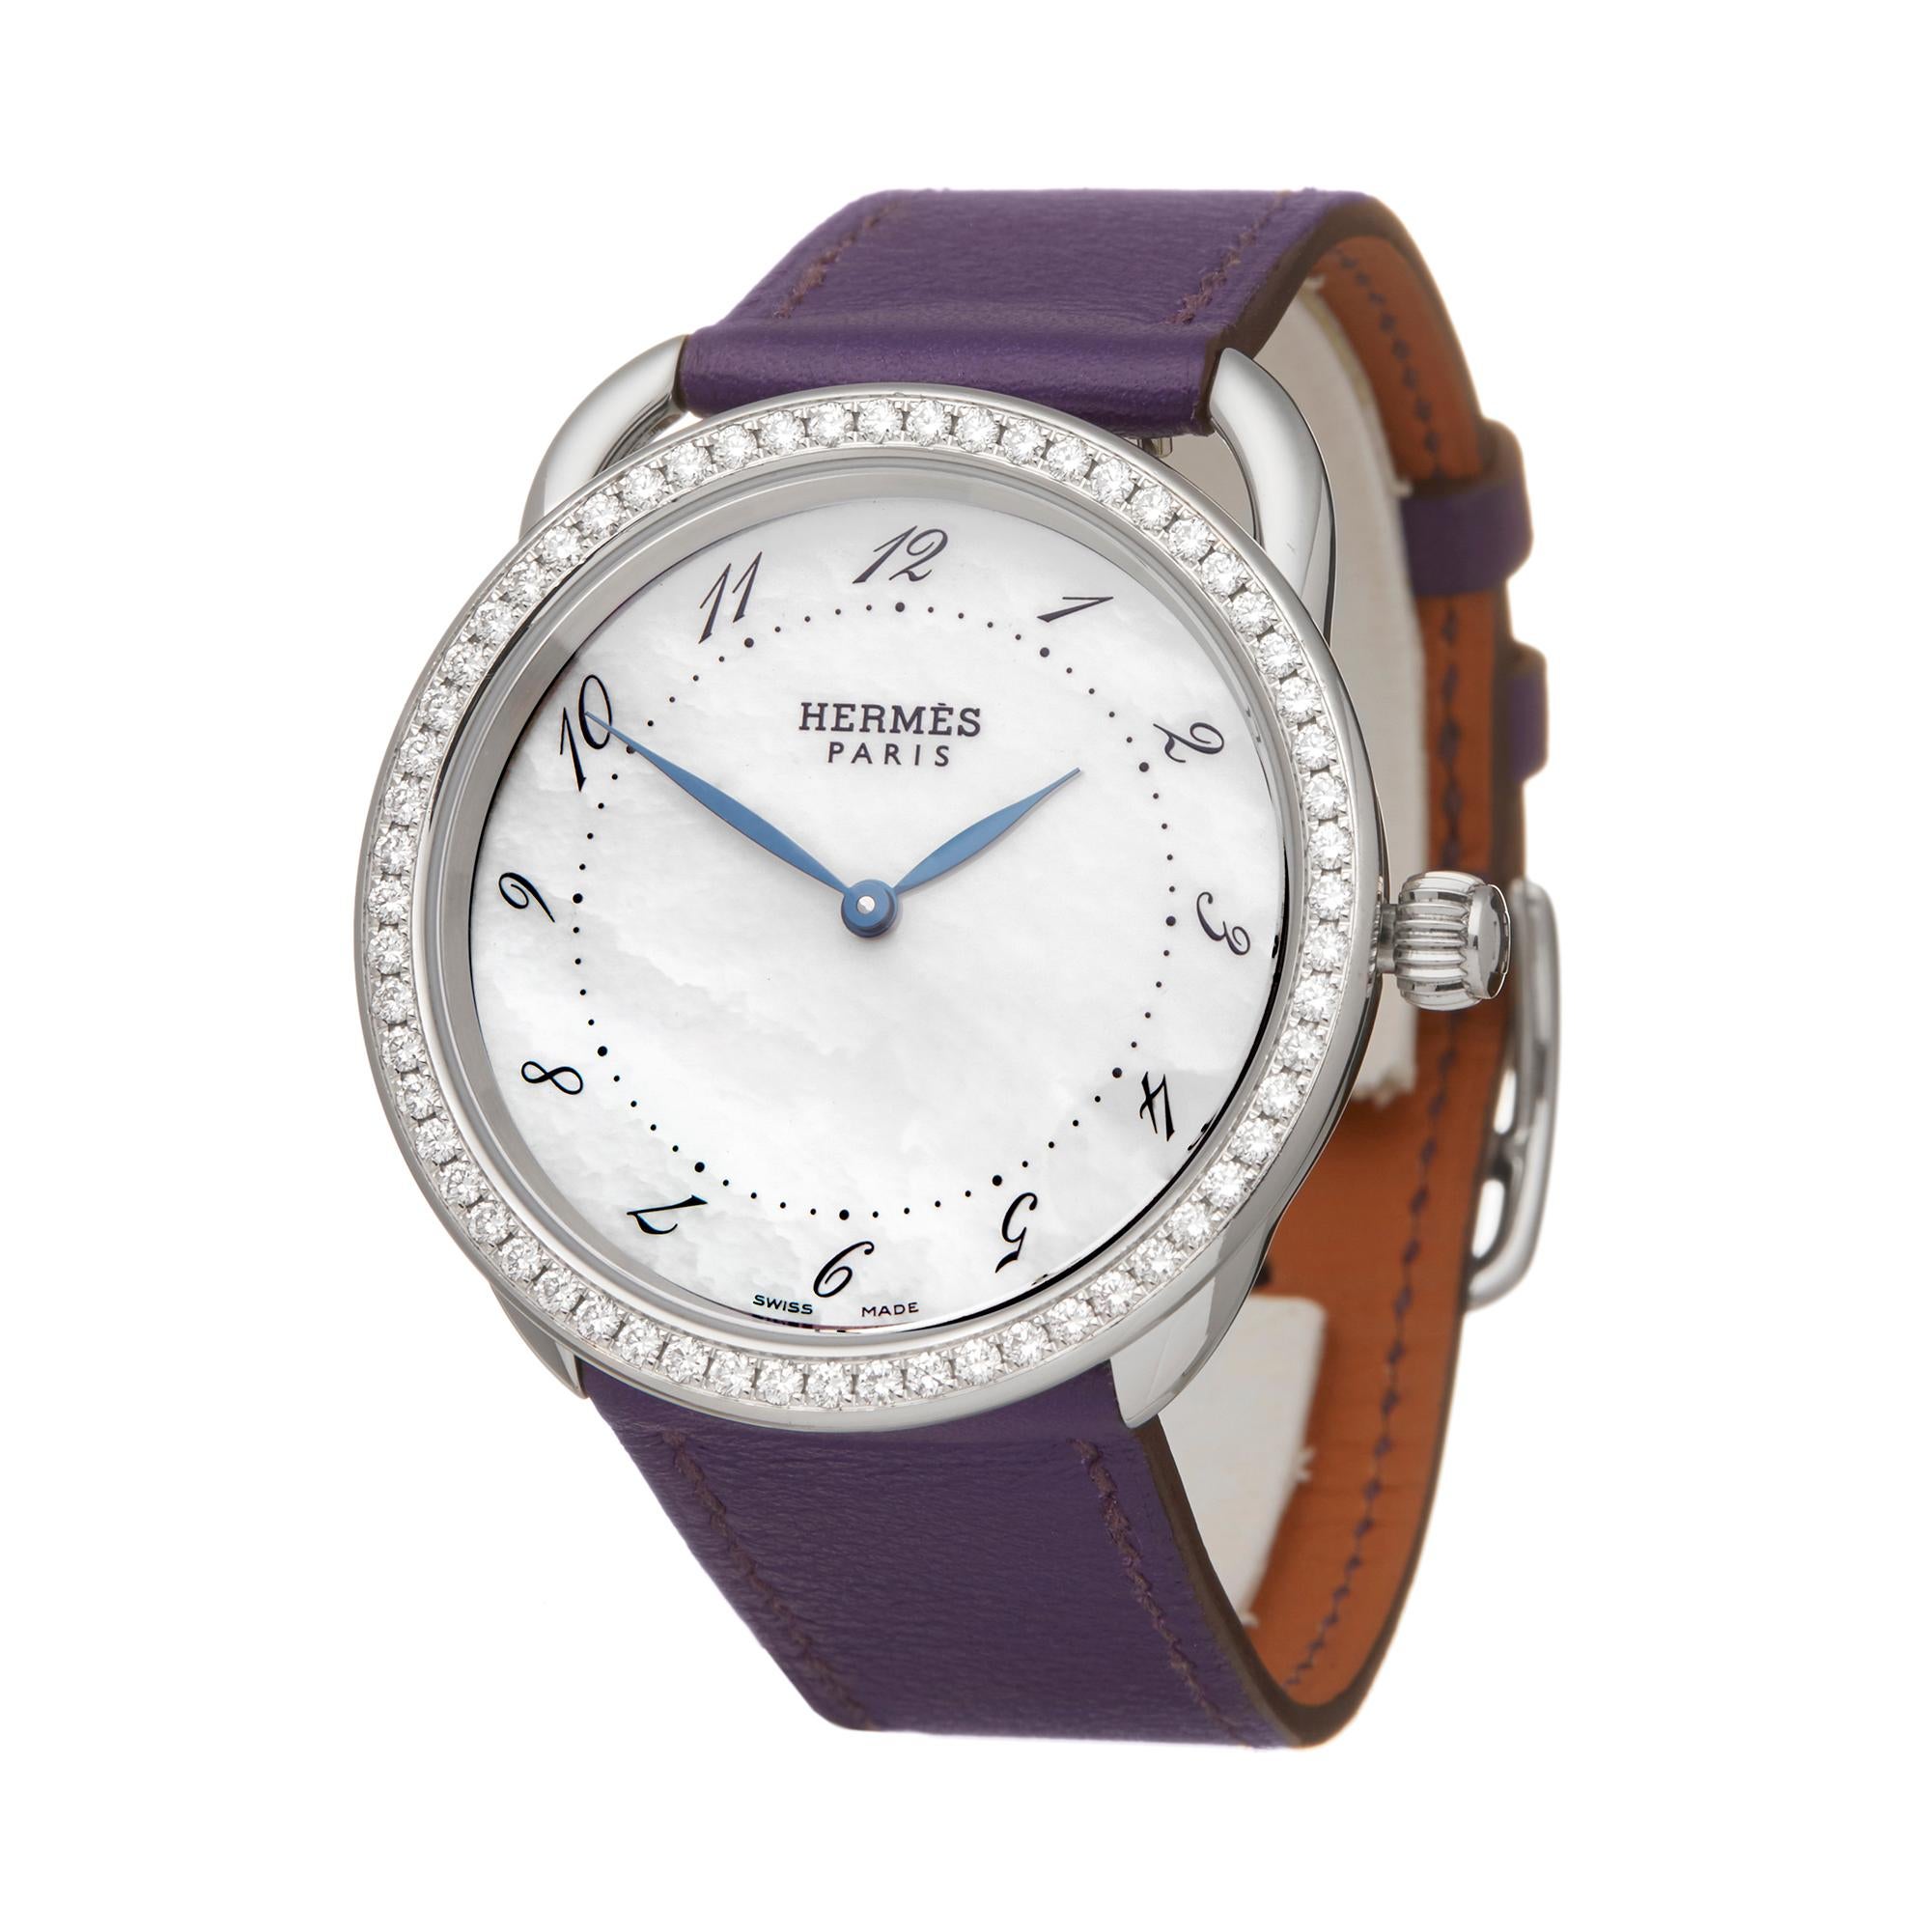 Reference: W6010
Manufacturer: Hermès
Model: Arceau
Model Reference: AR5730
Age: Circa 2010's
Gender: Women's
Box and Papers: Box Only
Dial: Mother Of Pearl Arabic
Glass: Sapphire Crystal
Movement: Quartz
Water Resistance: To Manufacturers